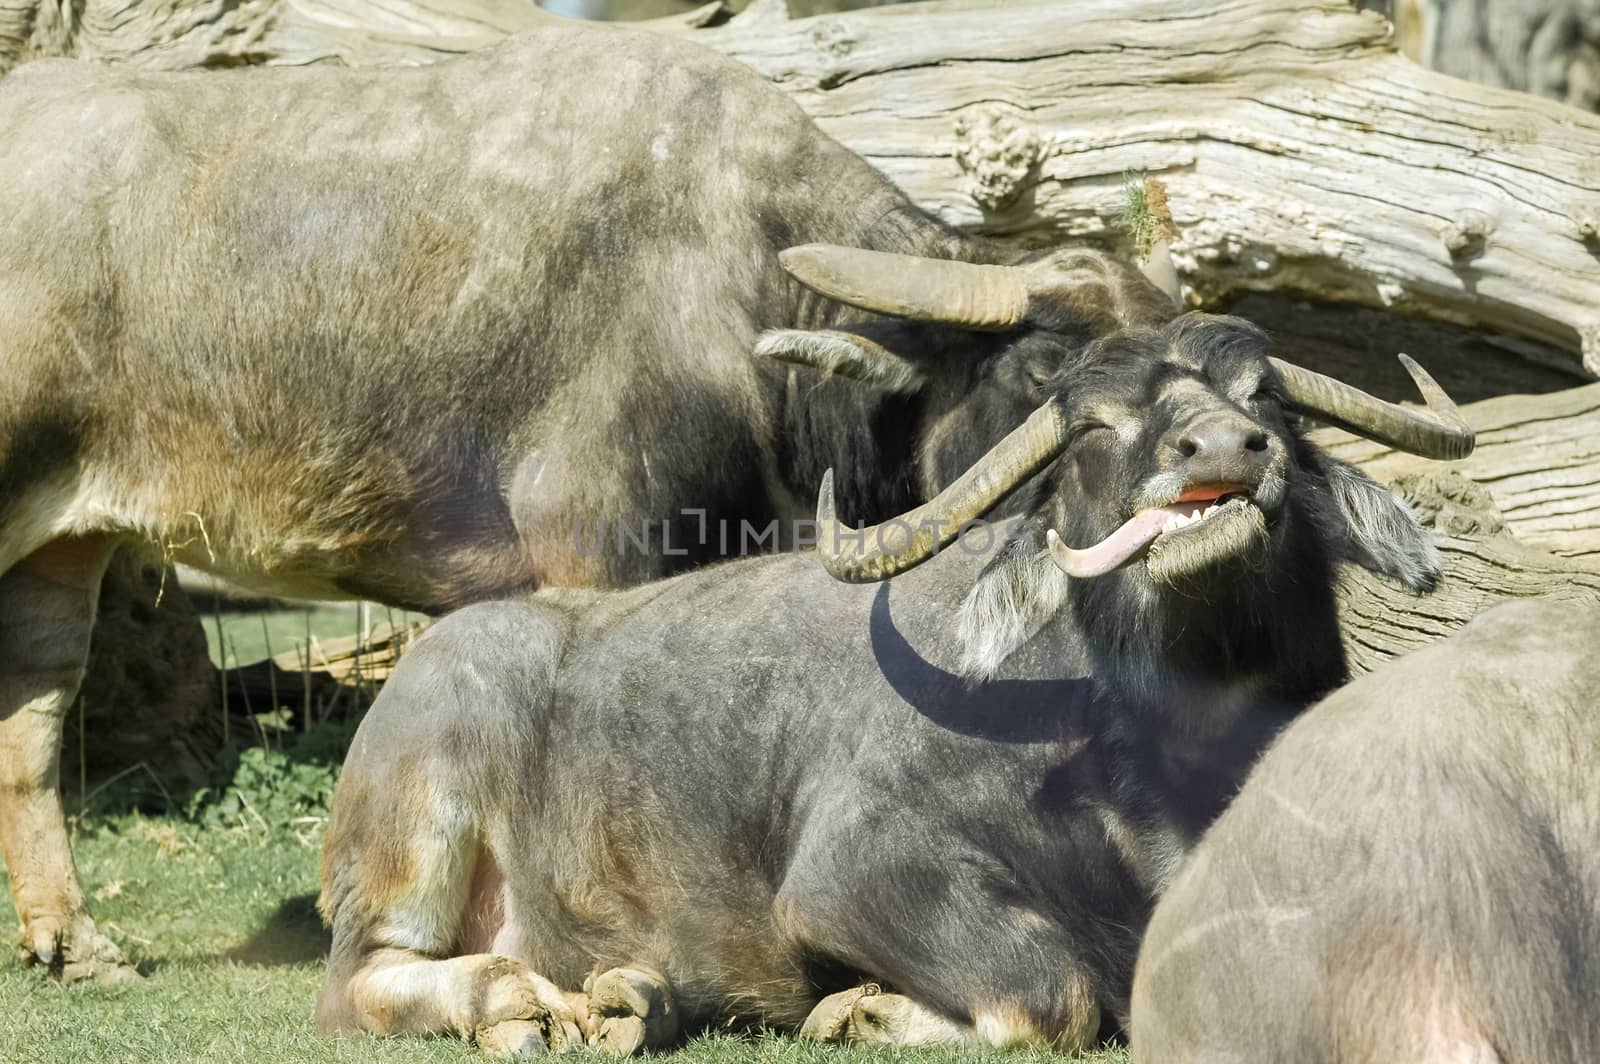 cape buffalo basking in sunshine with its tongue out